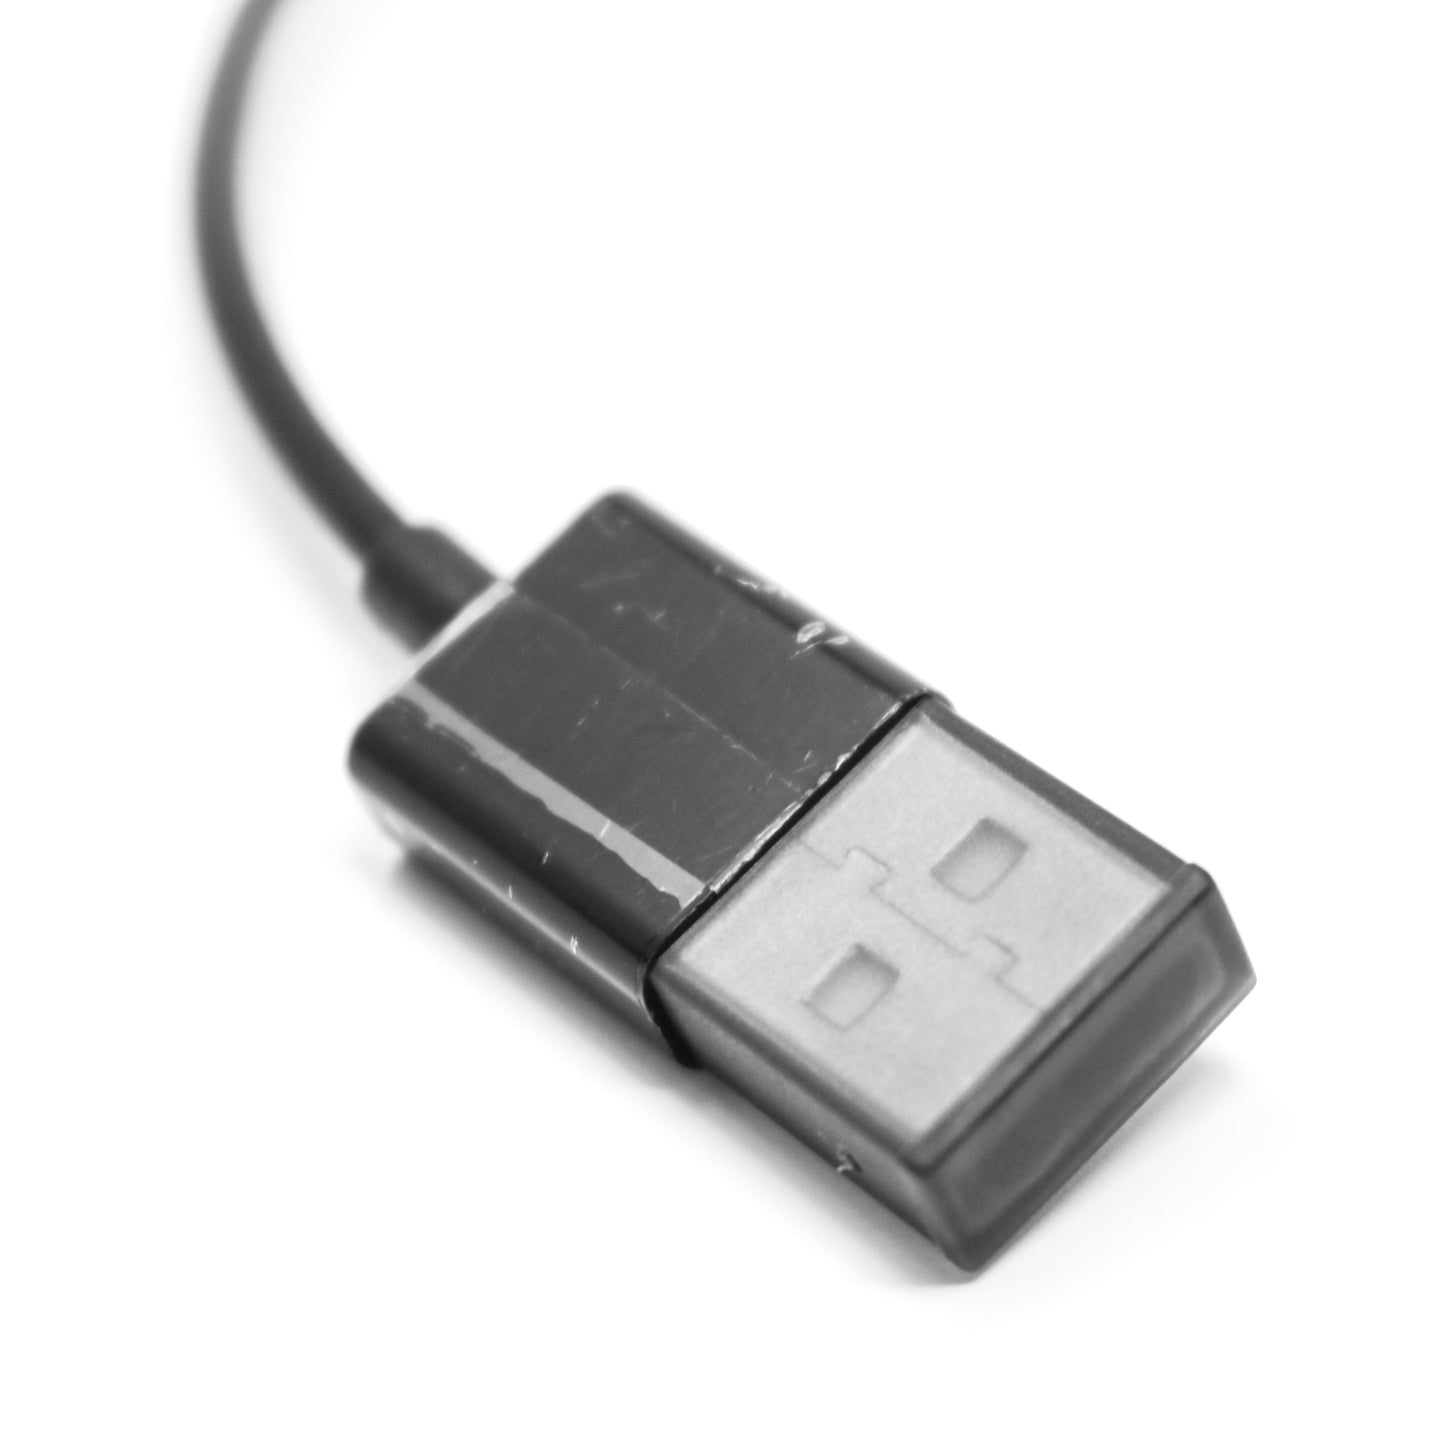 USB A to Micro B Cable, 6"